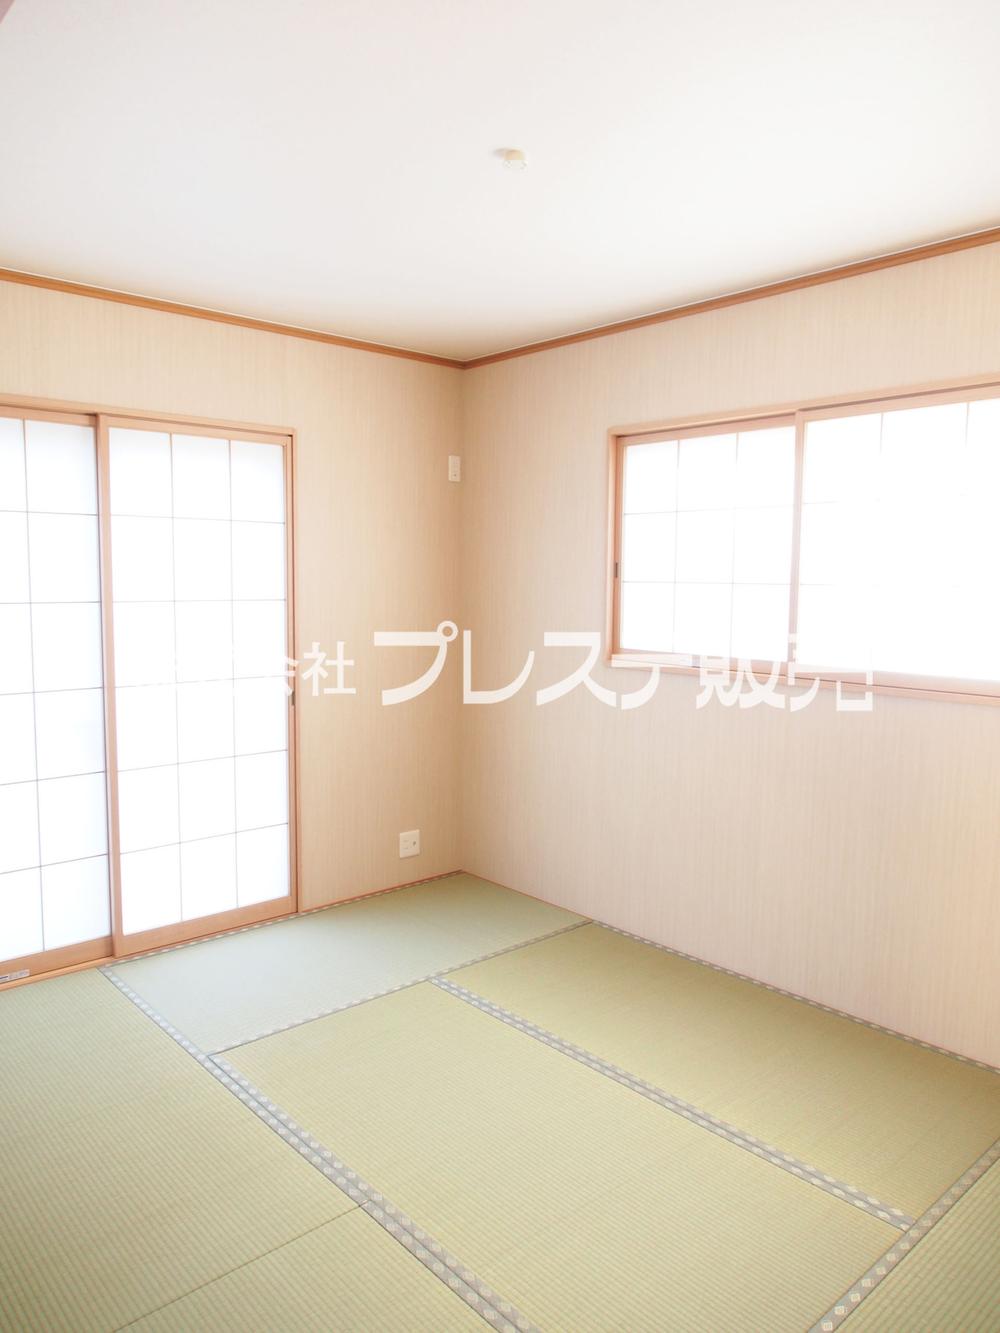 Non-living room. Local photo (No. 1 place Japanese-style)